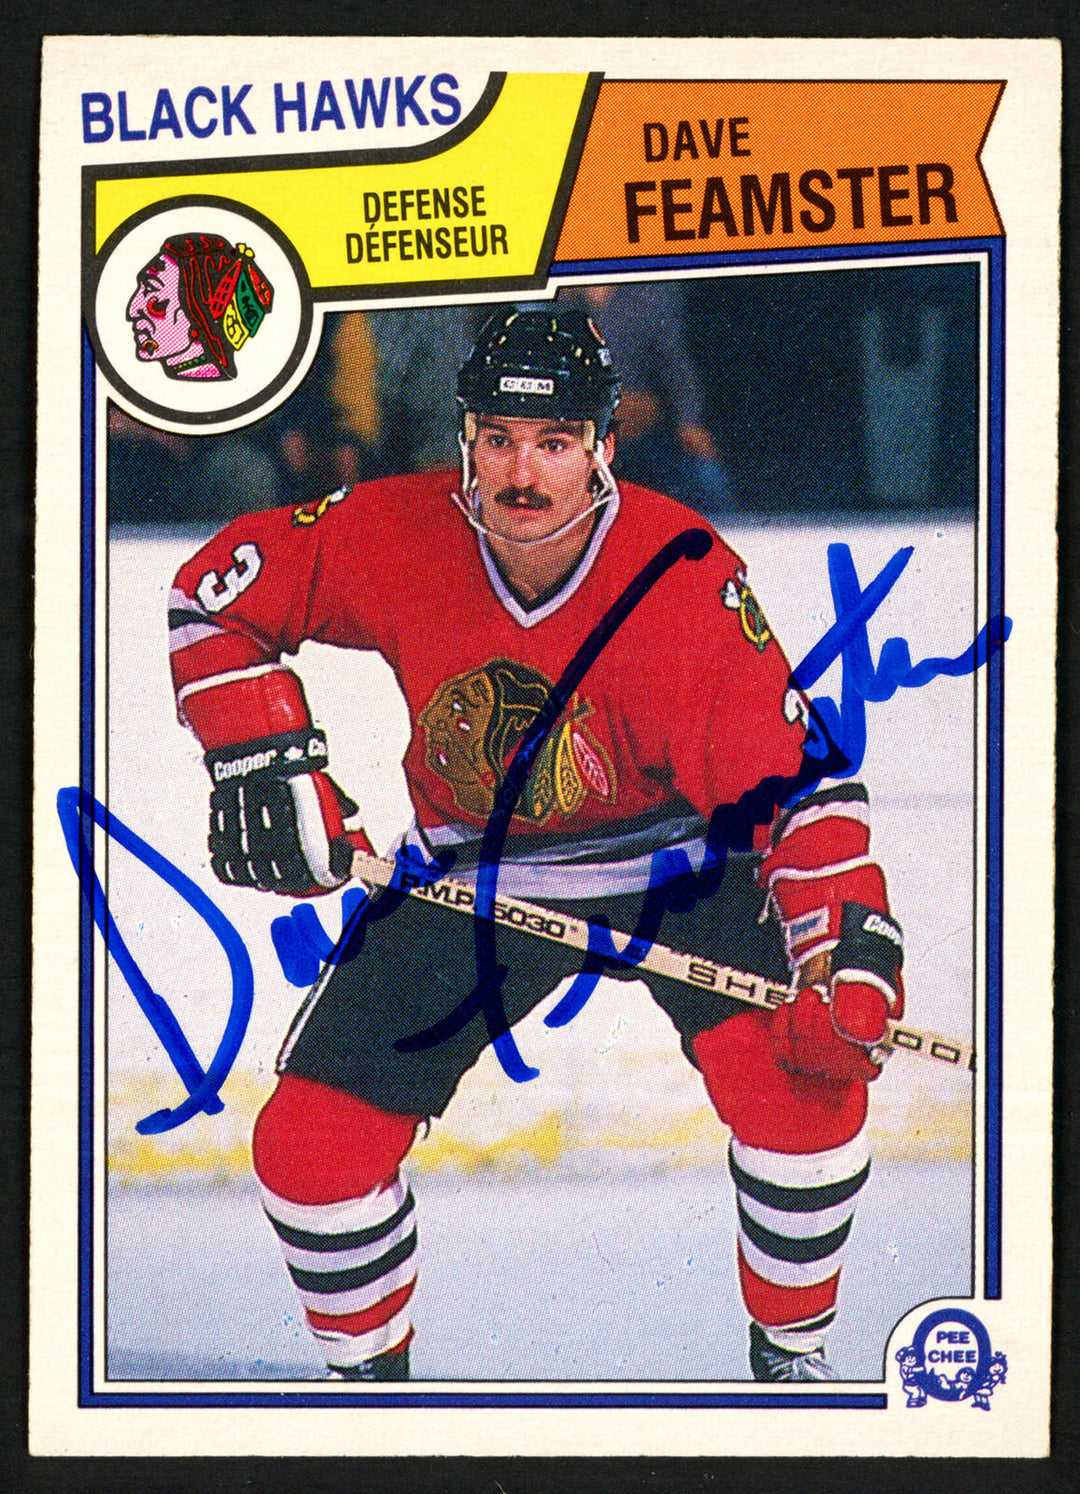 Dave Feamster Autographed 1983-84 O-Pee-Chee Rookie Card #100 Blackhawks 150214 Image 2